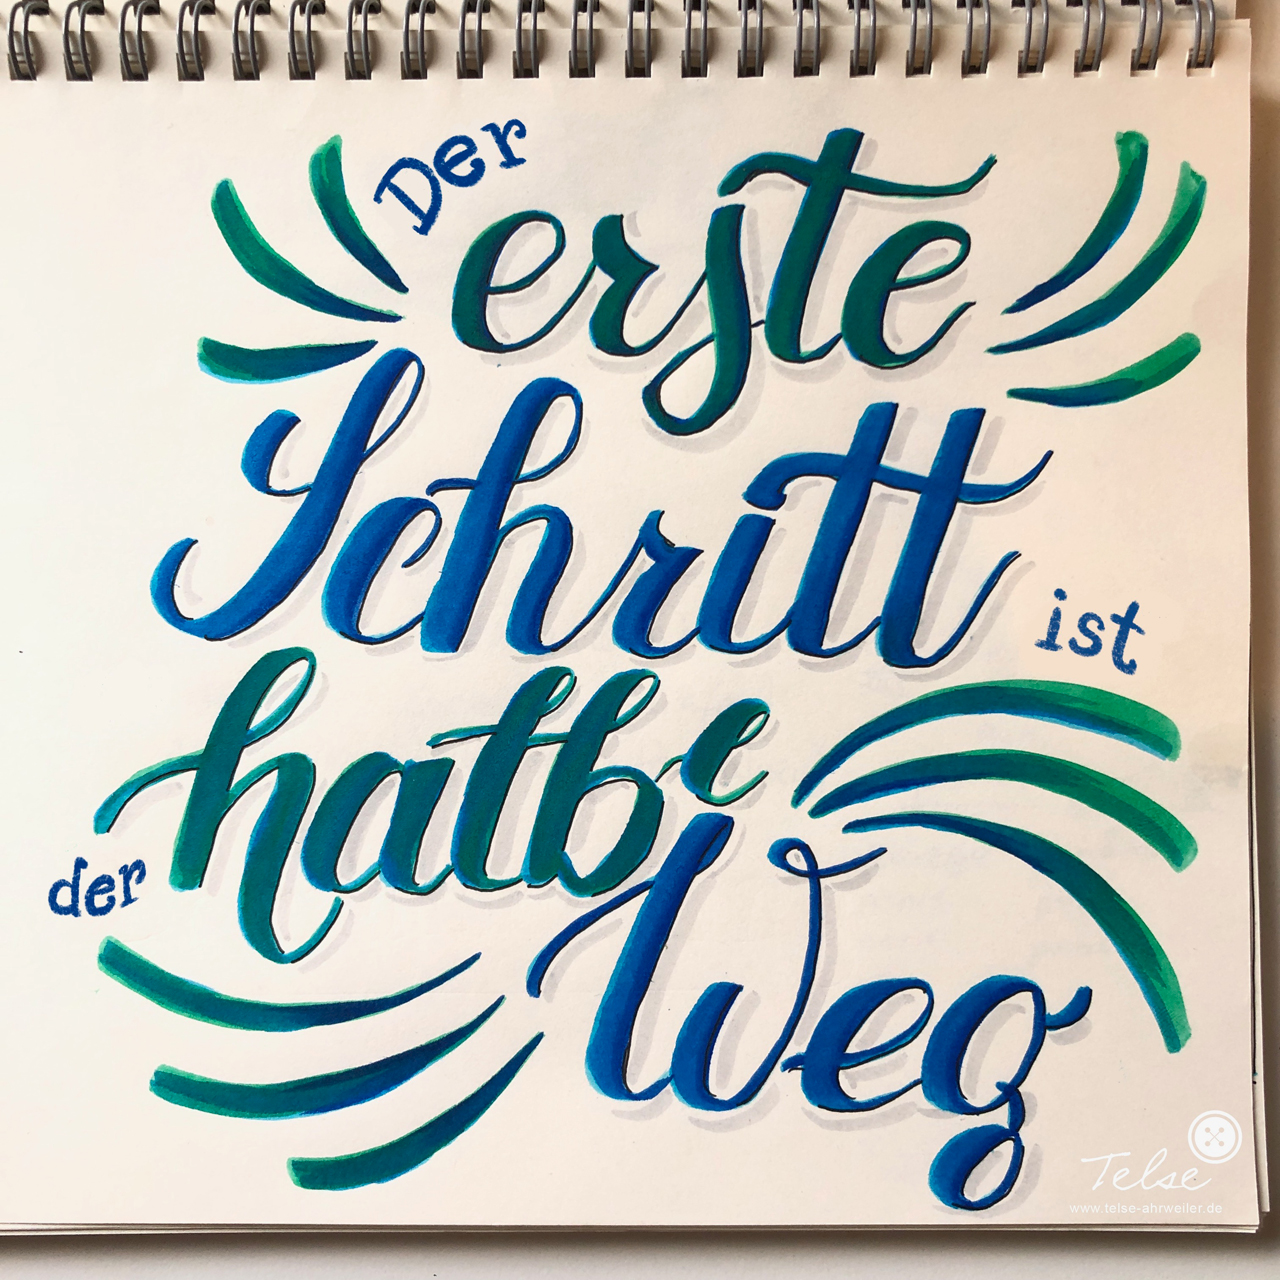 Lettering by @telse_ahrweiler CC-BY